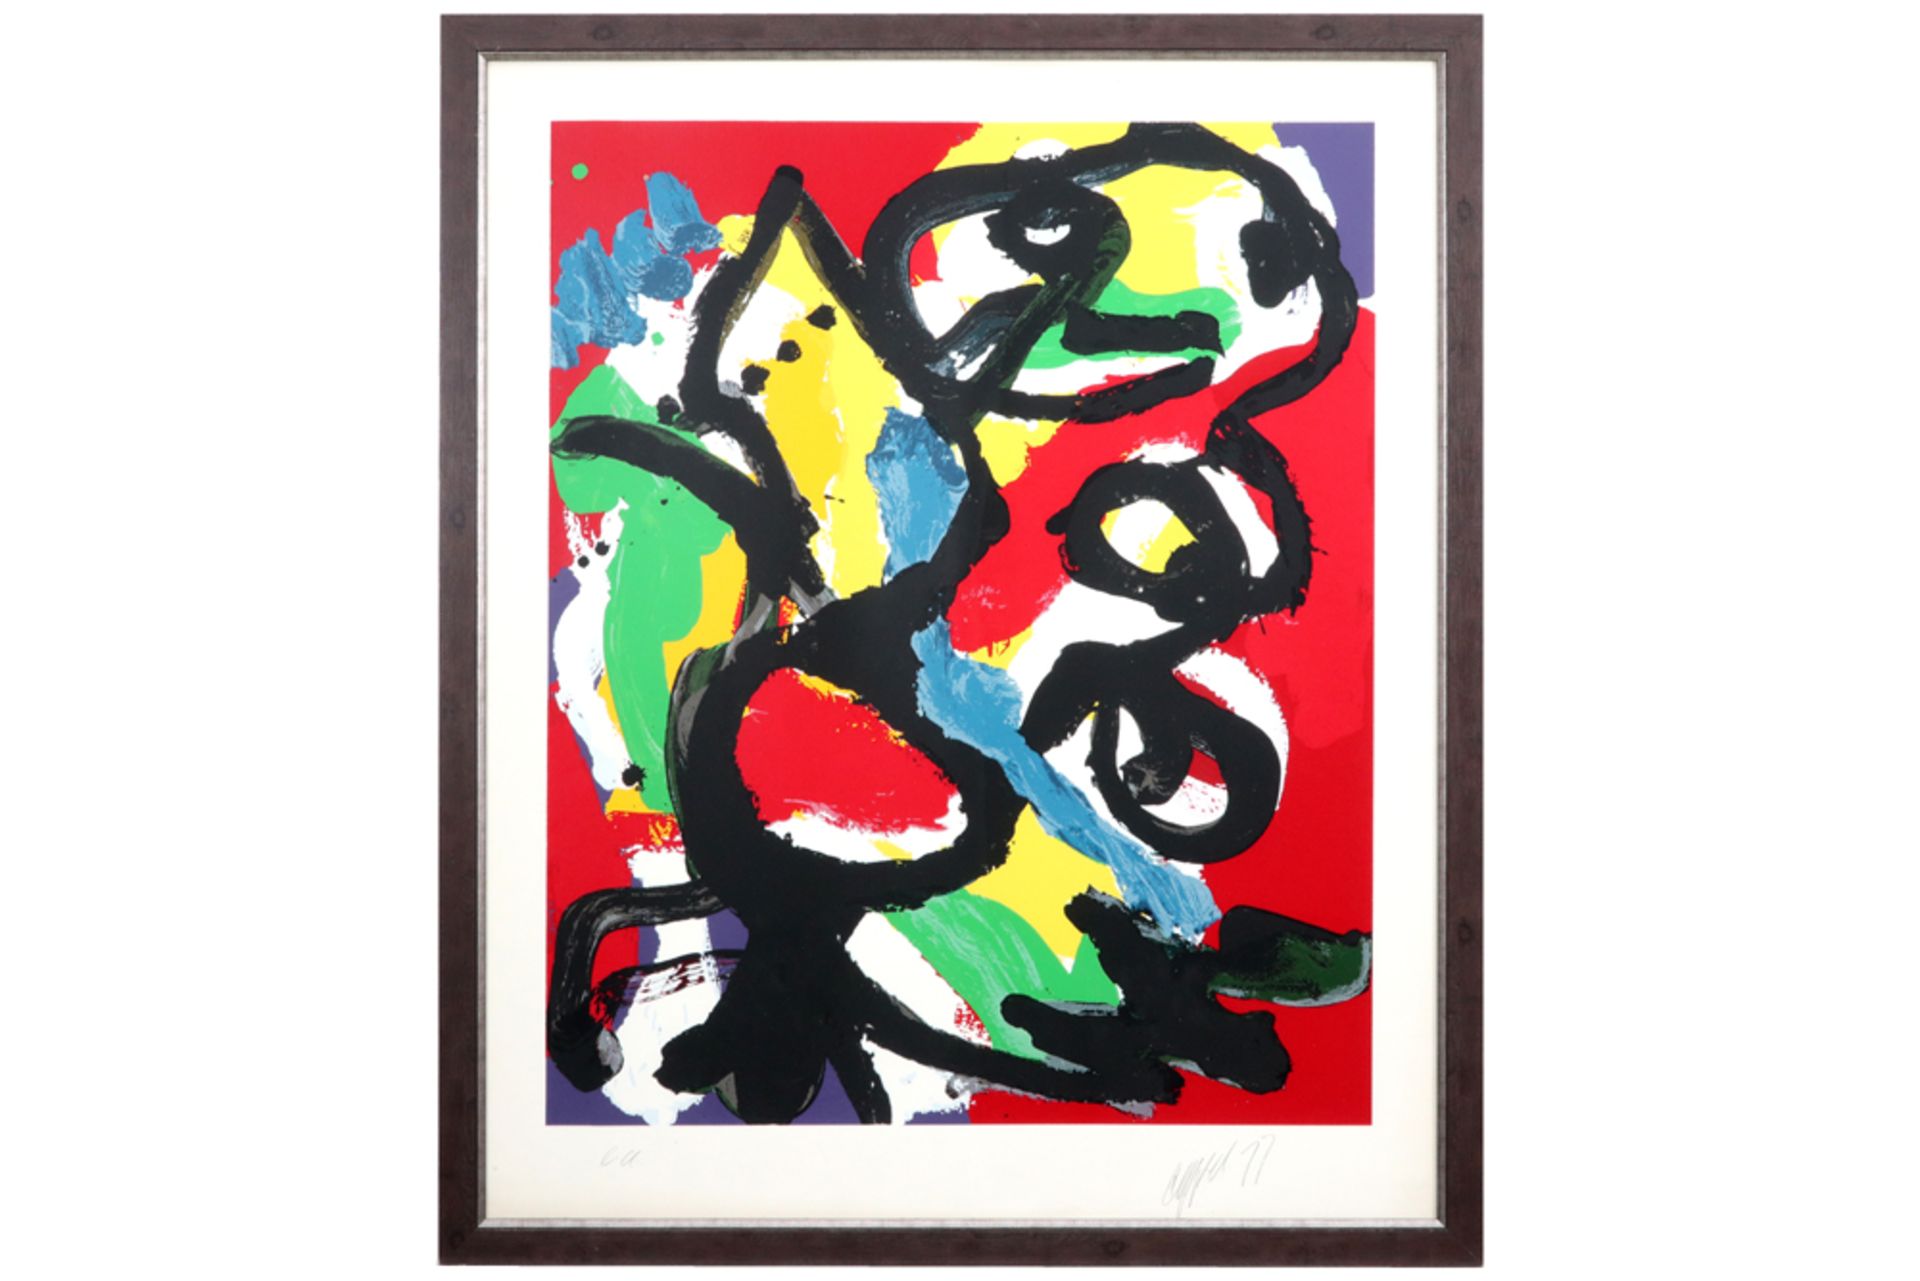 Karel Appel signed and (19)77 dated lithograph printed in colors from the "Seven Summer Days" - Image 3 of 3